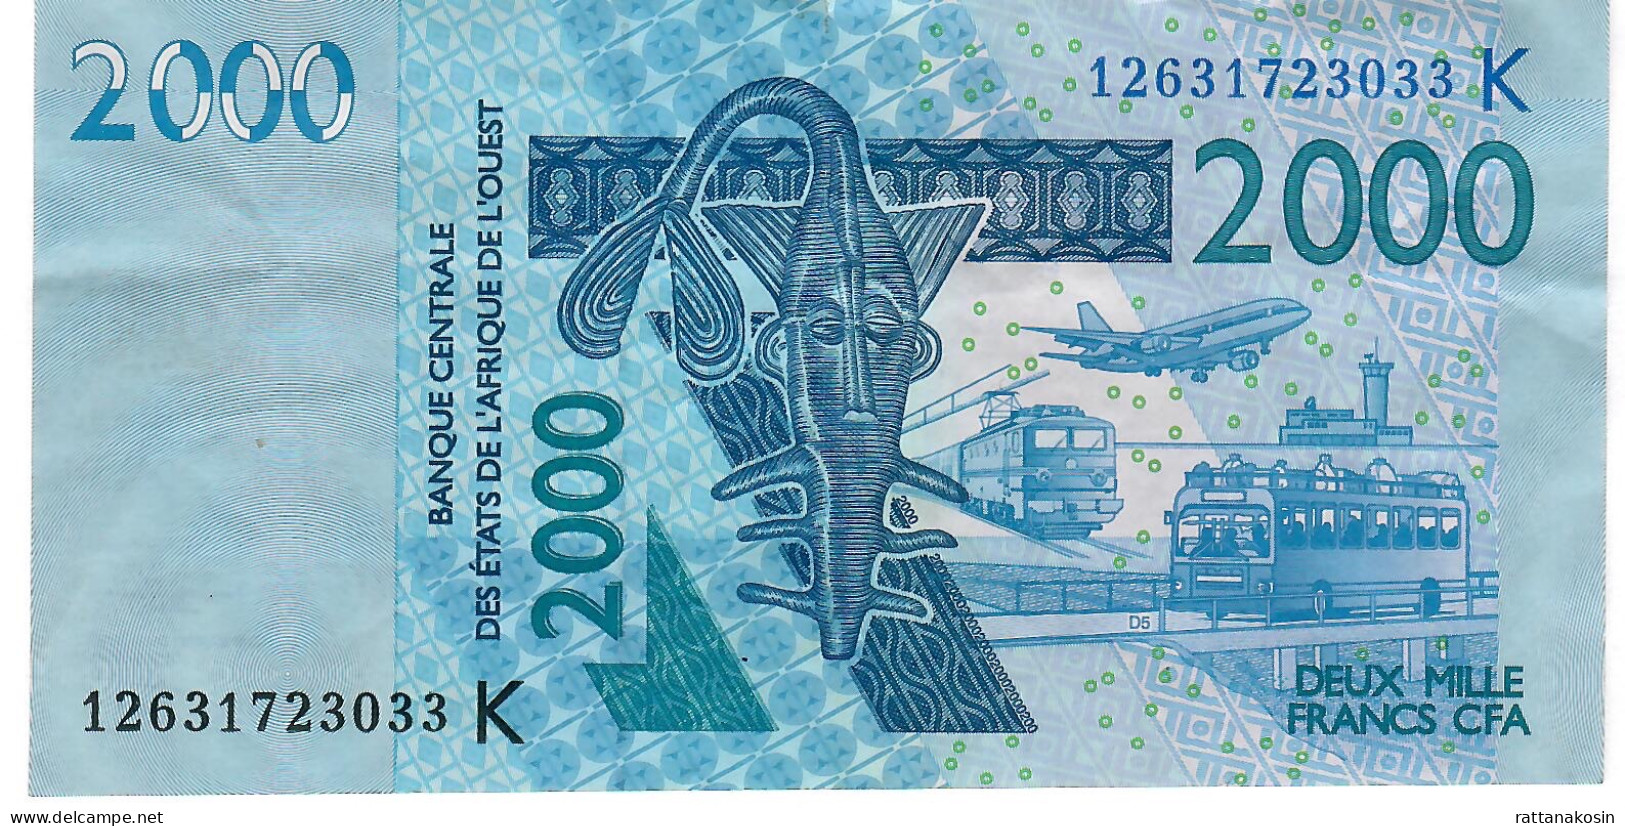 W.A.S. SENEGAL  P716Kl 2000 FRANCS (20)12 2012 Signature 39   VF - West African States